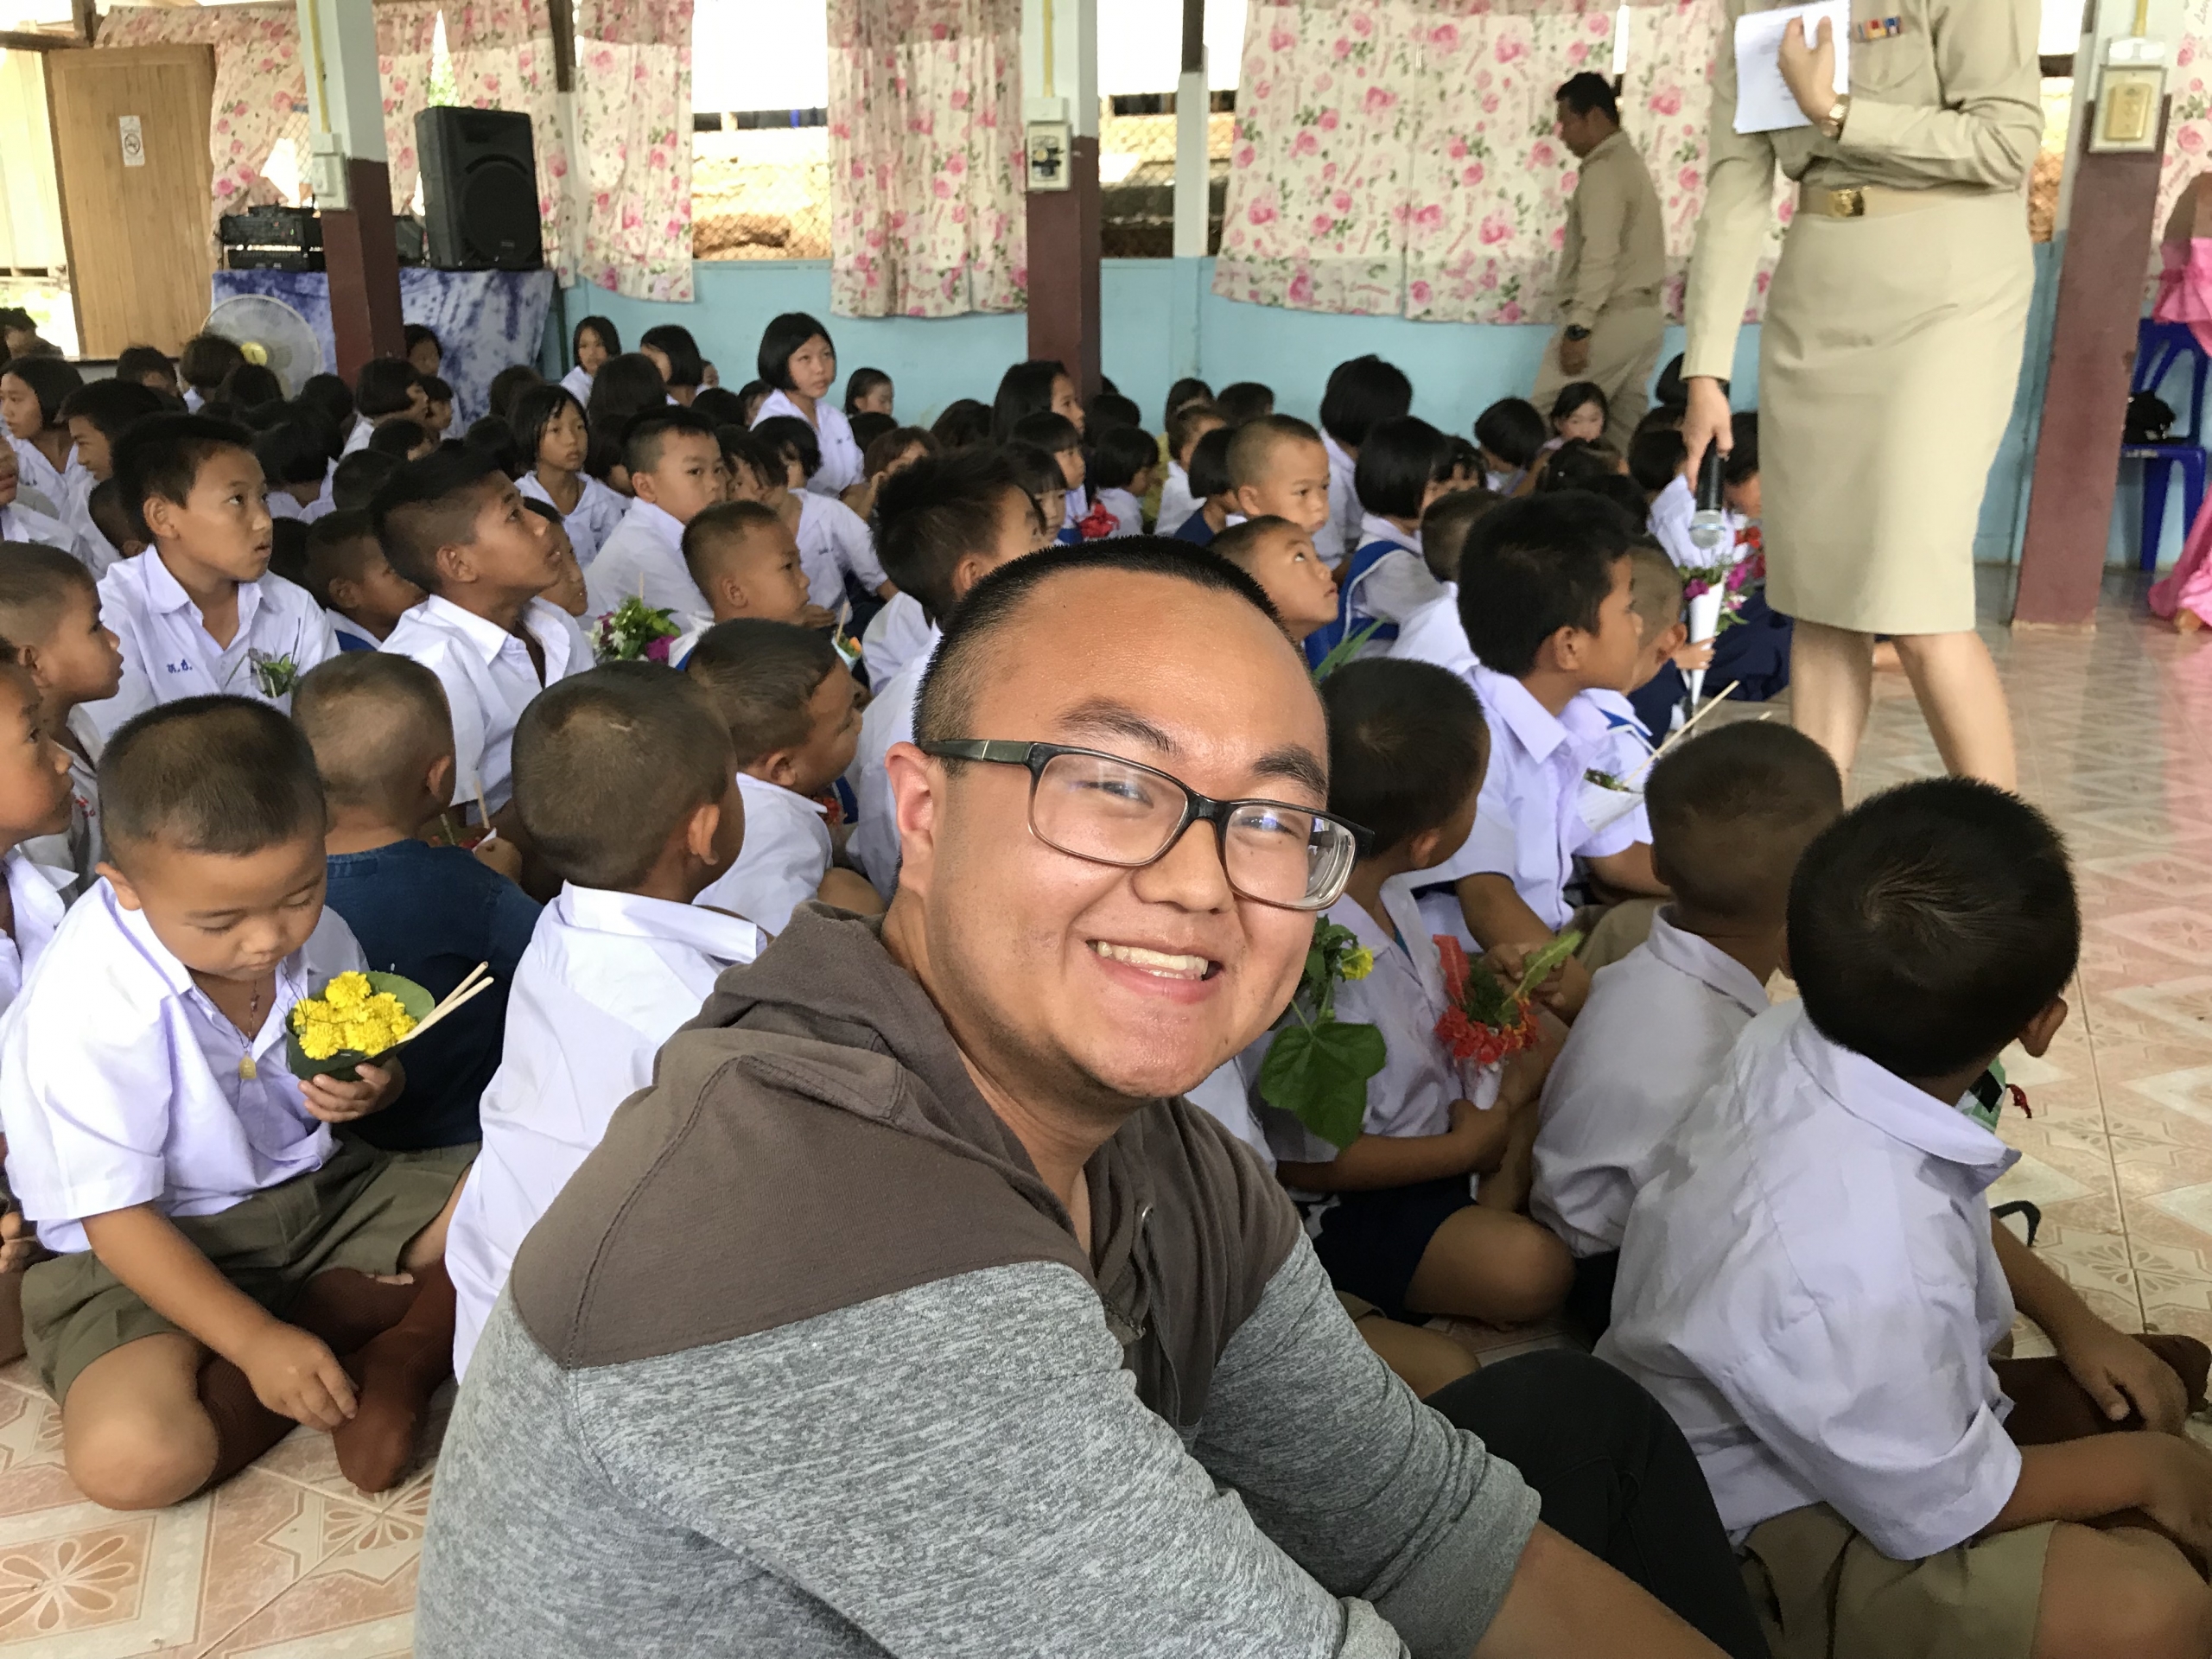 Pengcheng sits on the floor of a classroom surrounded by small children in uniform.